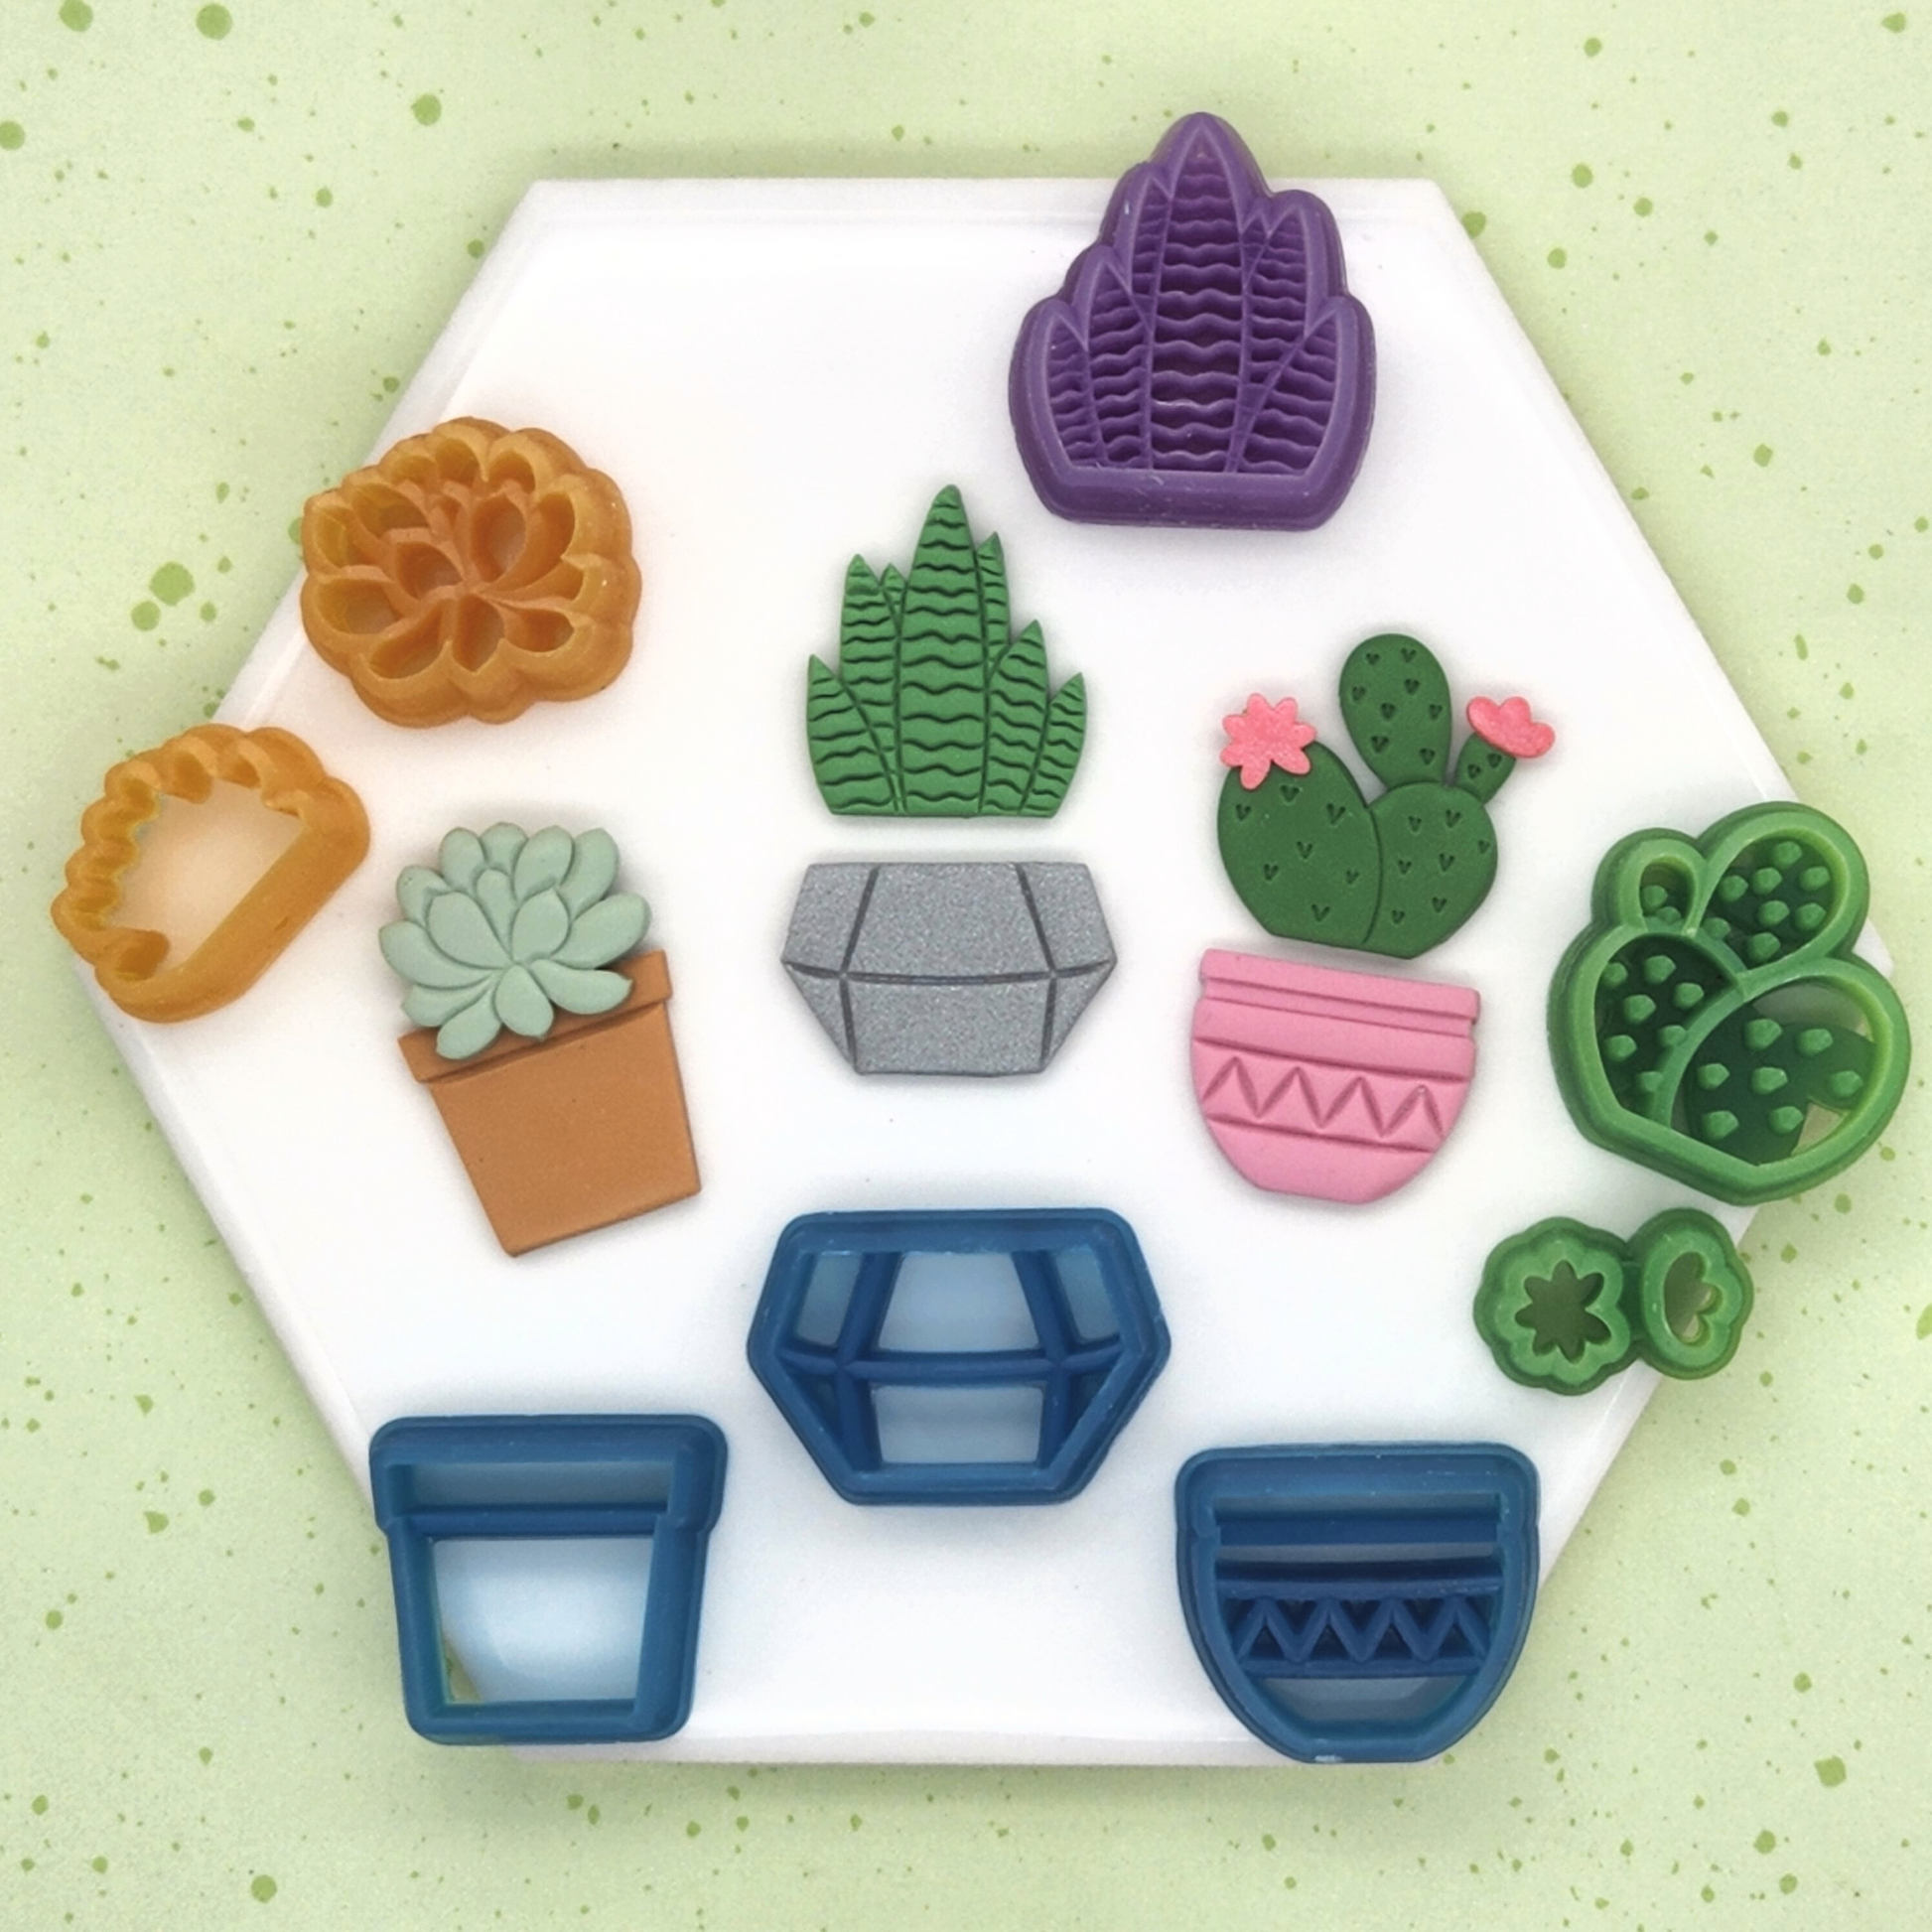 Full set of Potted plants cutters and polymer clay samples. Included in the set are Cactus and Flowers Cutter Set, Snake Plant Cutter, Succulent and Back piece Cutter Set, Geometric Pot Cutter, Teracotta Pot Cutter, and Zigzag Pot Cutter.